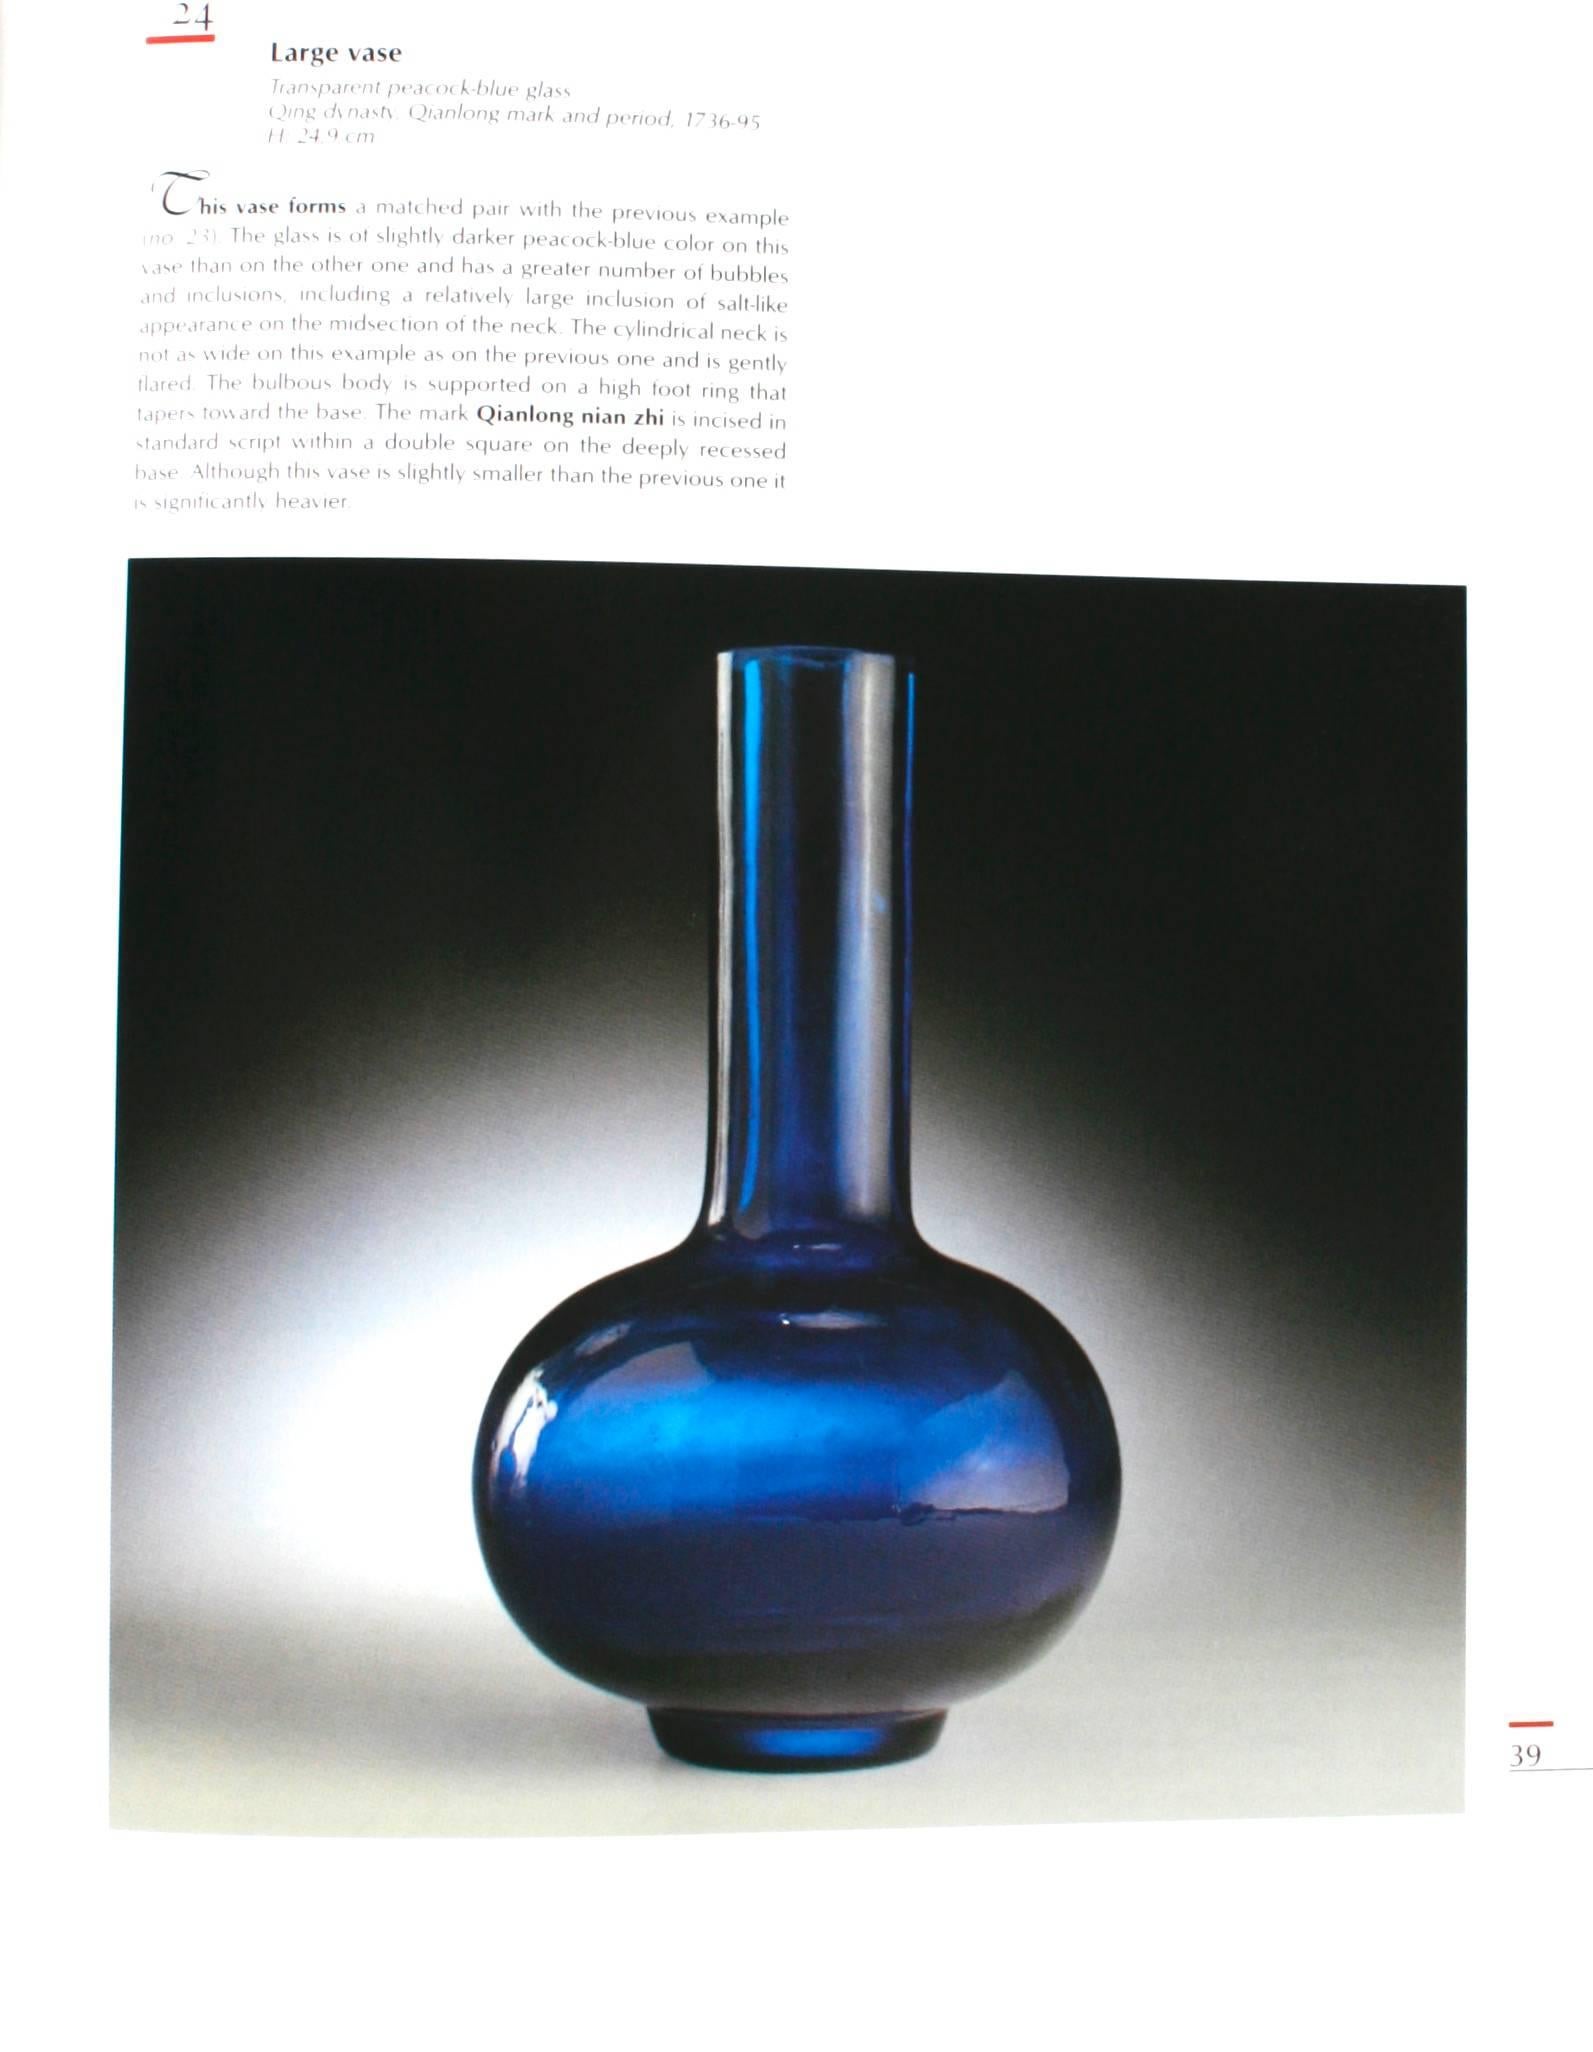 Treasures of Chinese Glass Workshops. Winter Park: Asiantiques, Inc. 1997. First edition hardcover with dust jacket. 79 pp. An exhibition catalogue of Chinese glass shown at the Lowe Art Museum in Miami from December 3 to January 30, 2000. The show